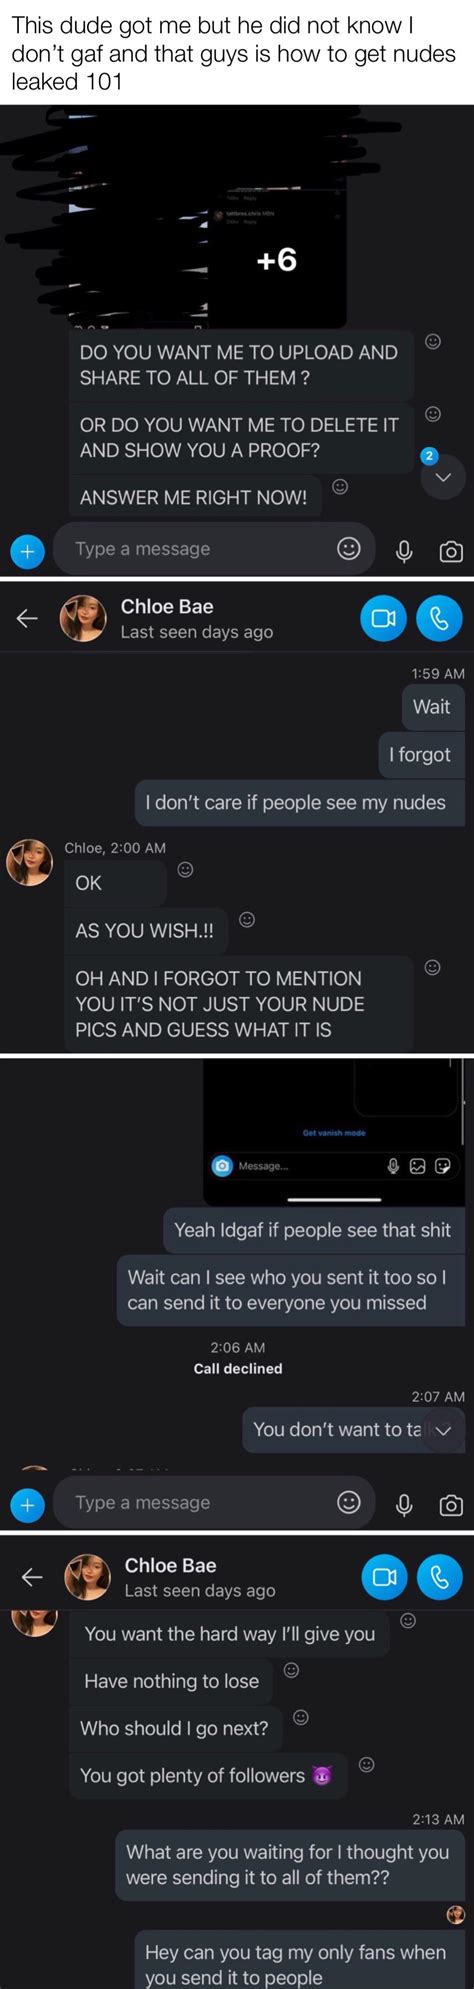 took screenshots of me naked and try to blackmail me try again r scams